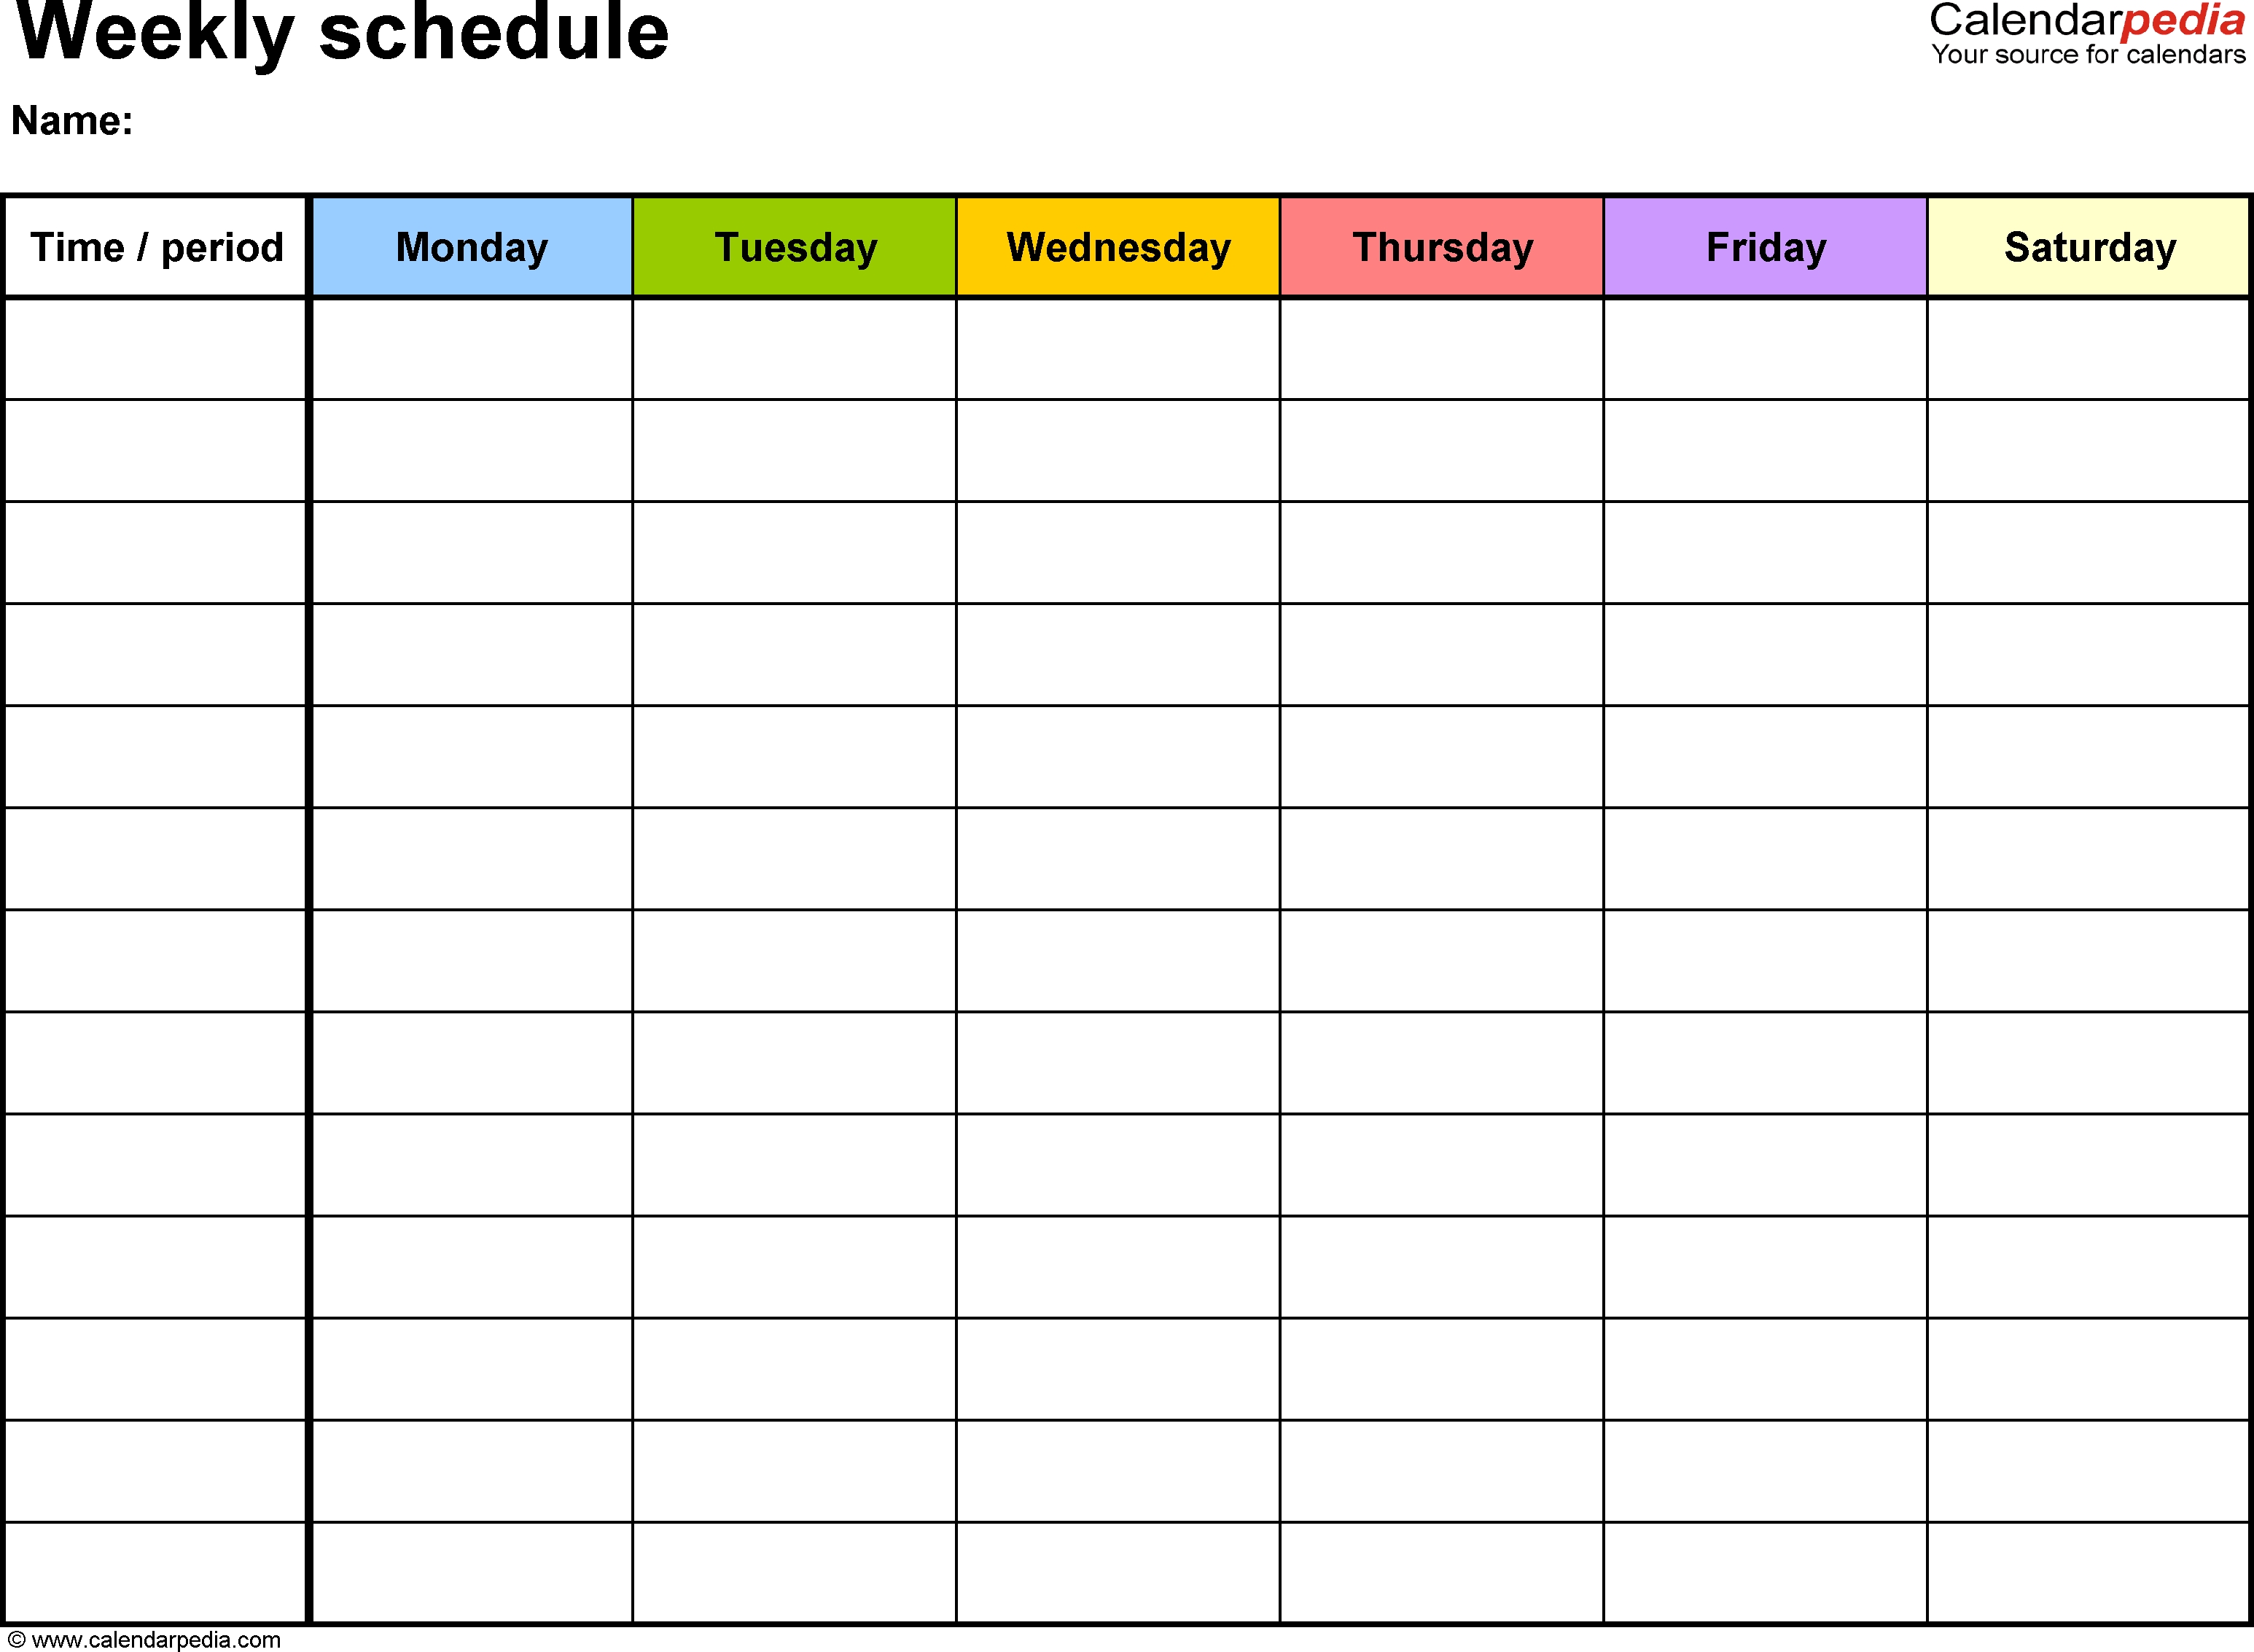 Free Weekly Schedule Templates For Word - 18 Templates Dashing Calendar To Fill In Template